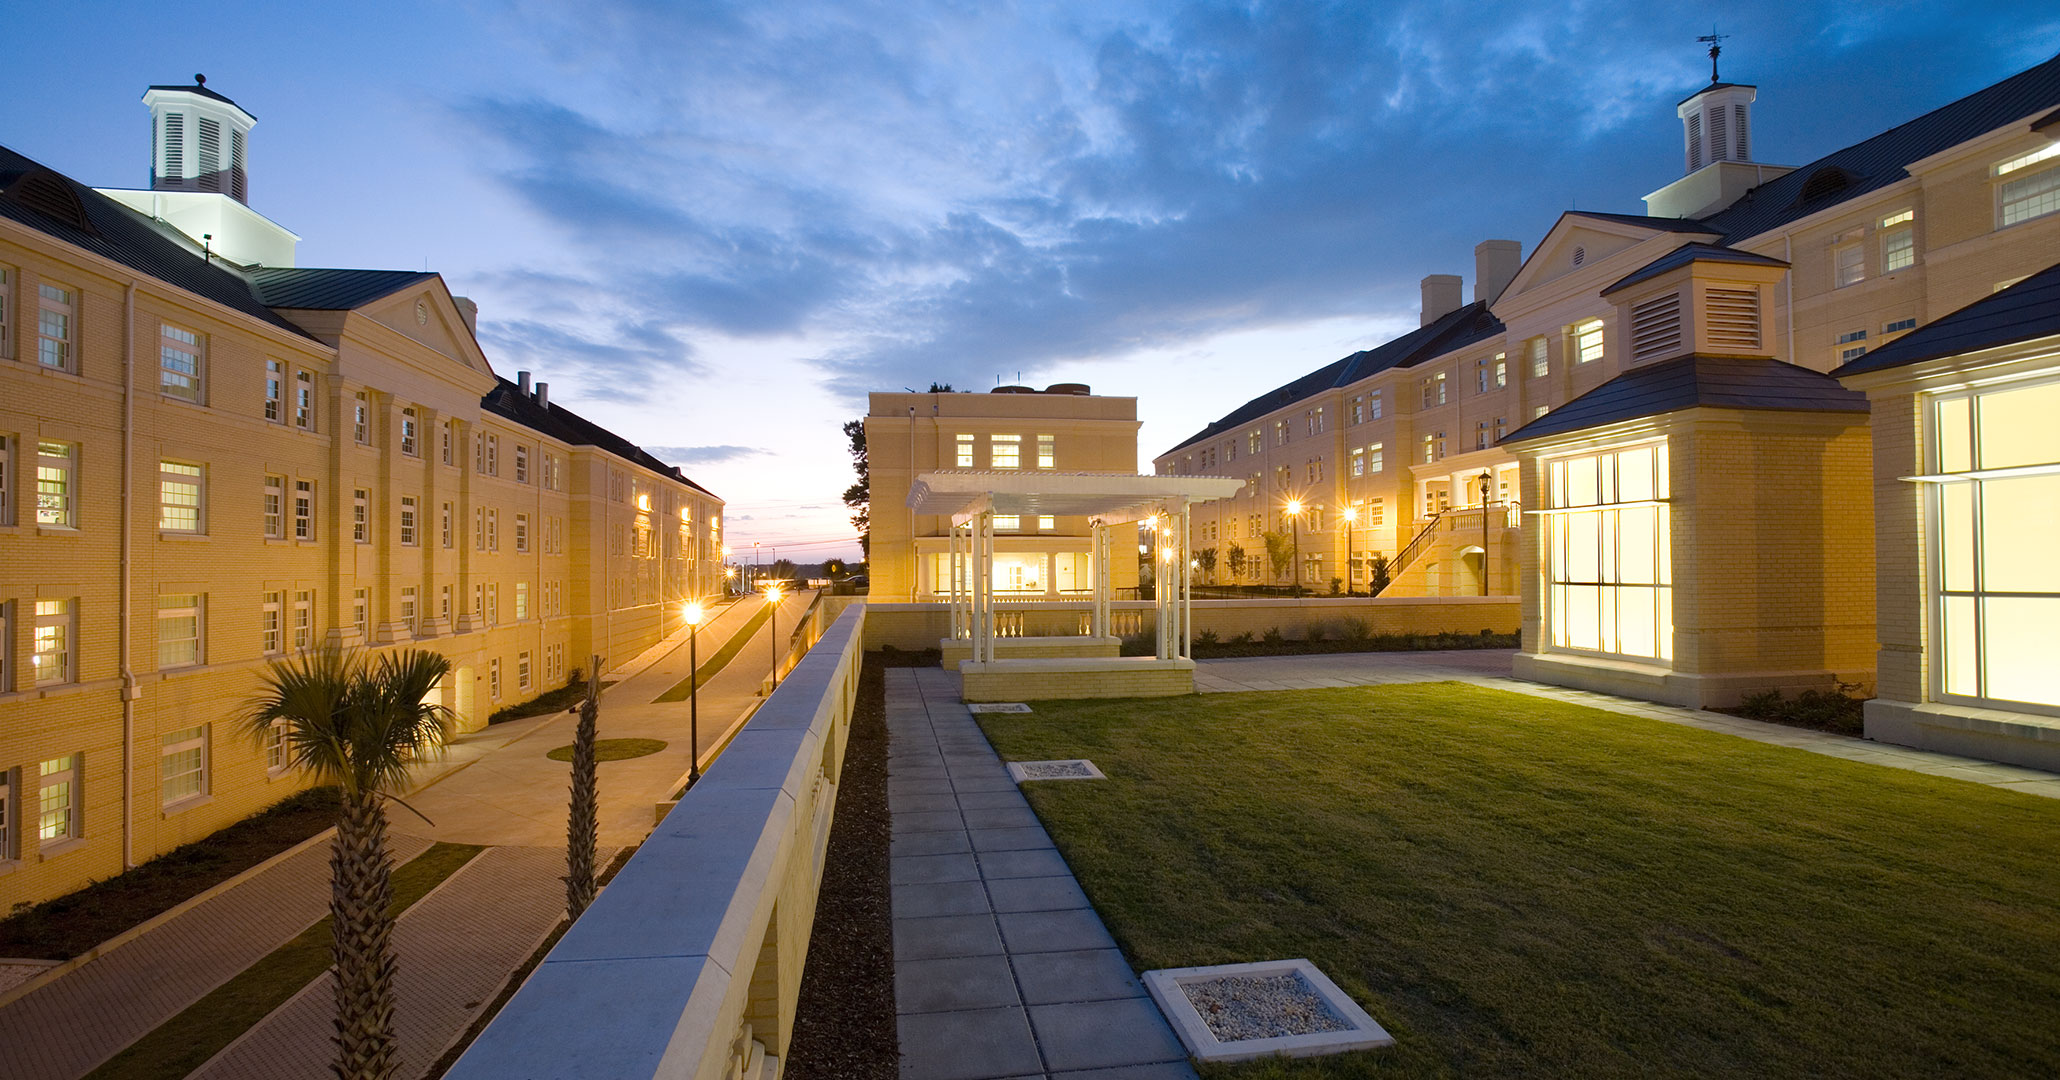 University of South Carolina hired Boudreaux architects and designers to building the Green Quad on Columbia, SC campus.